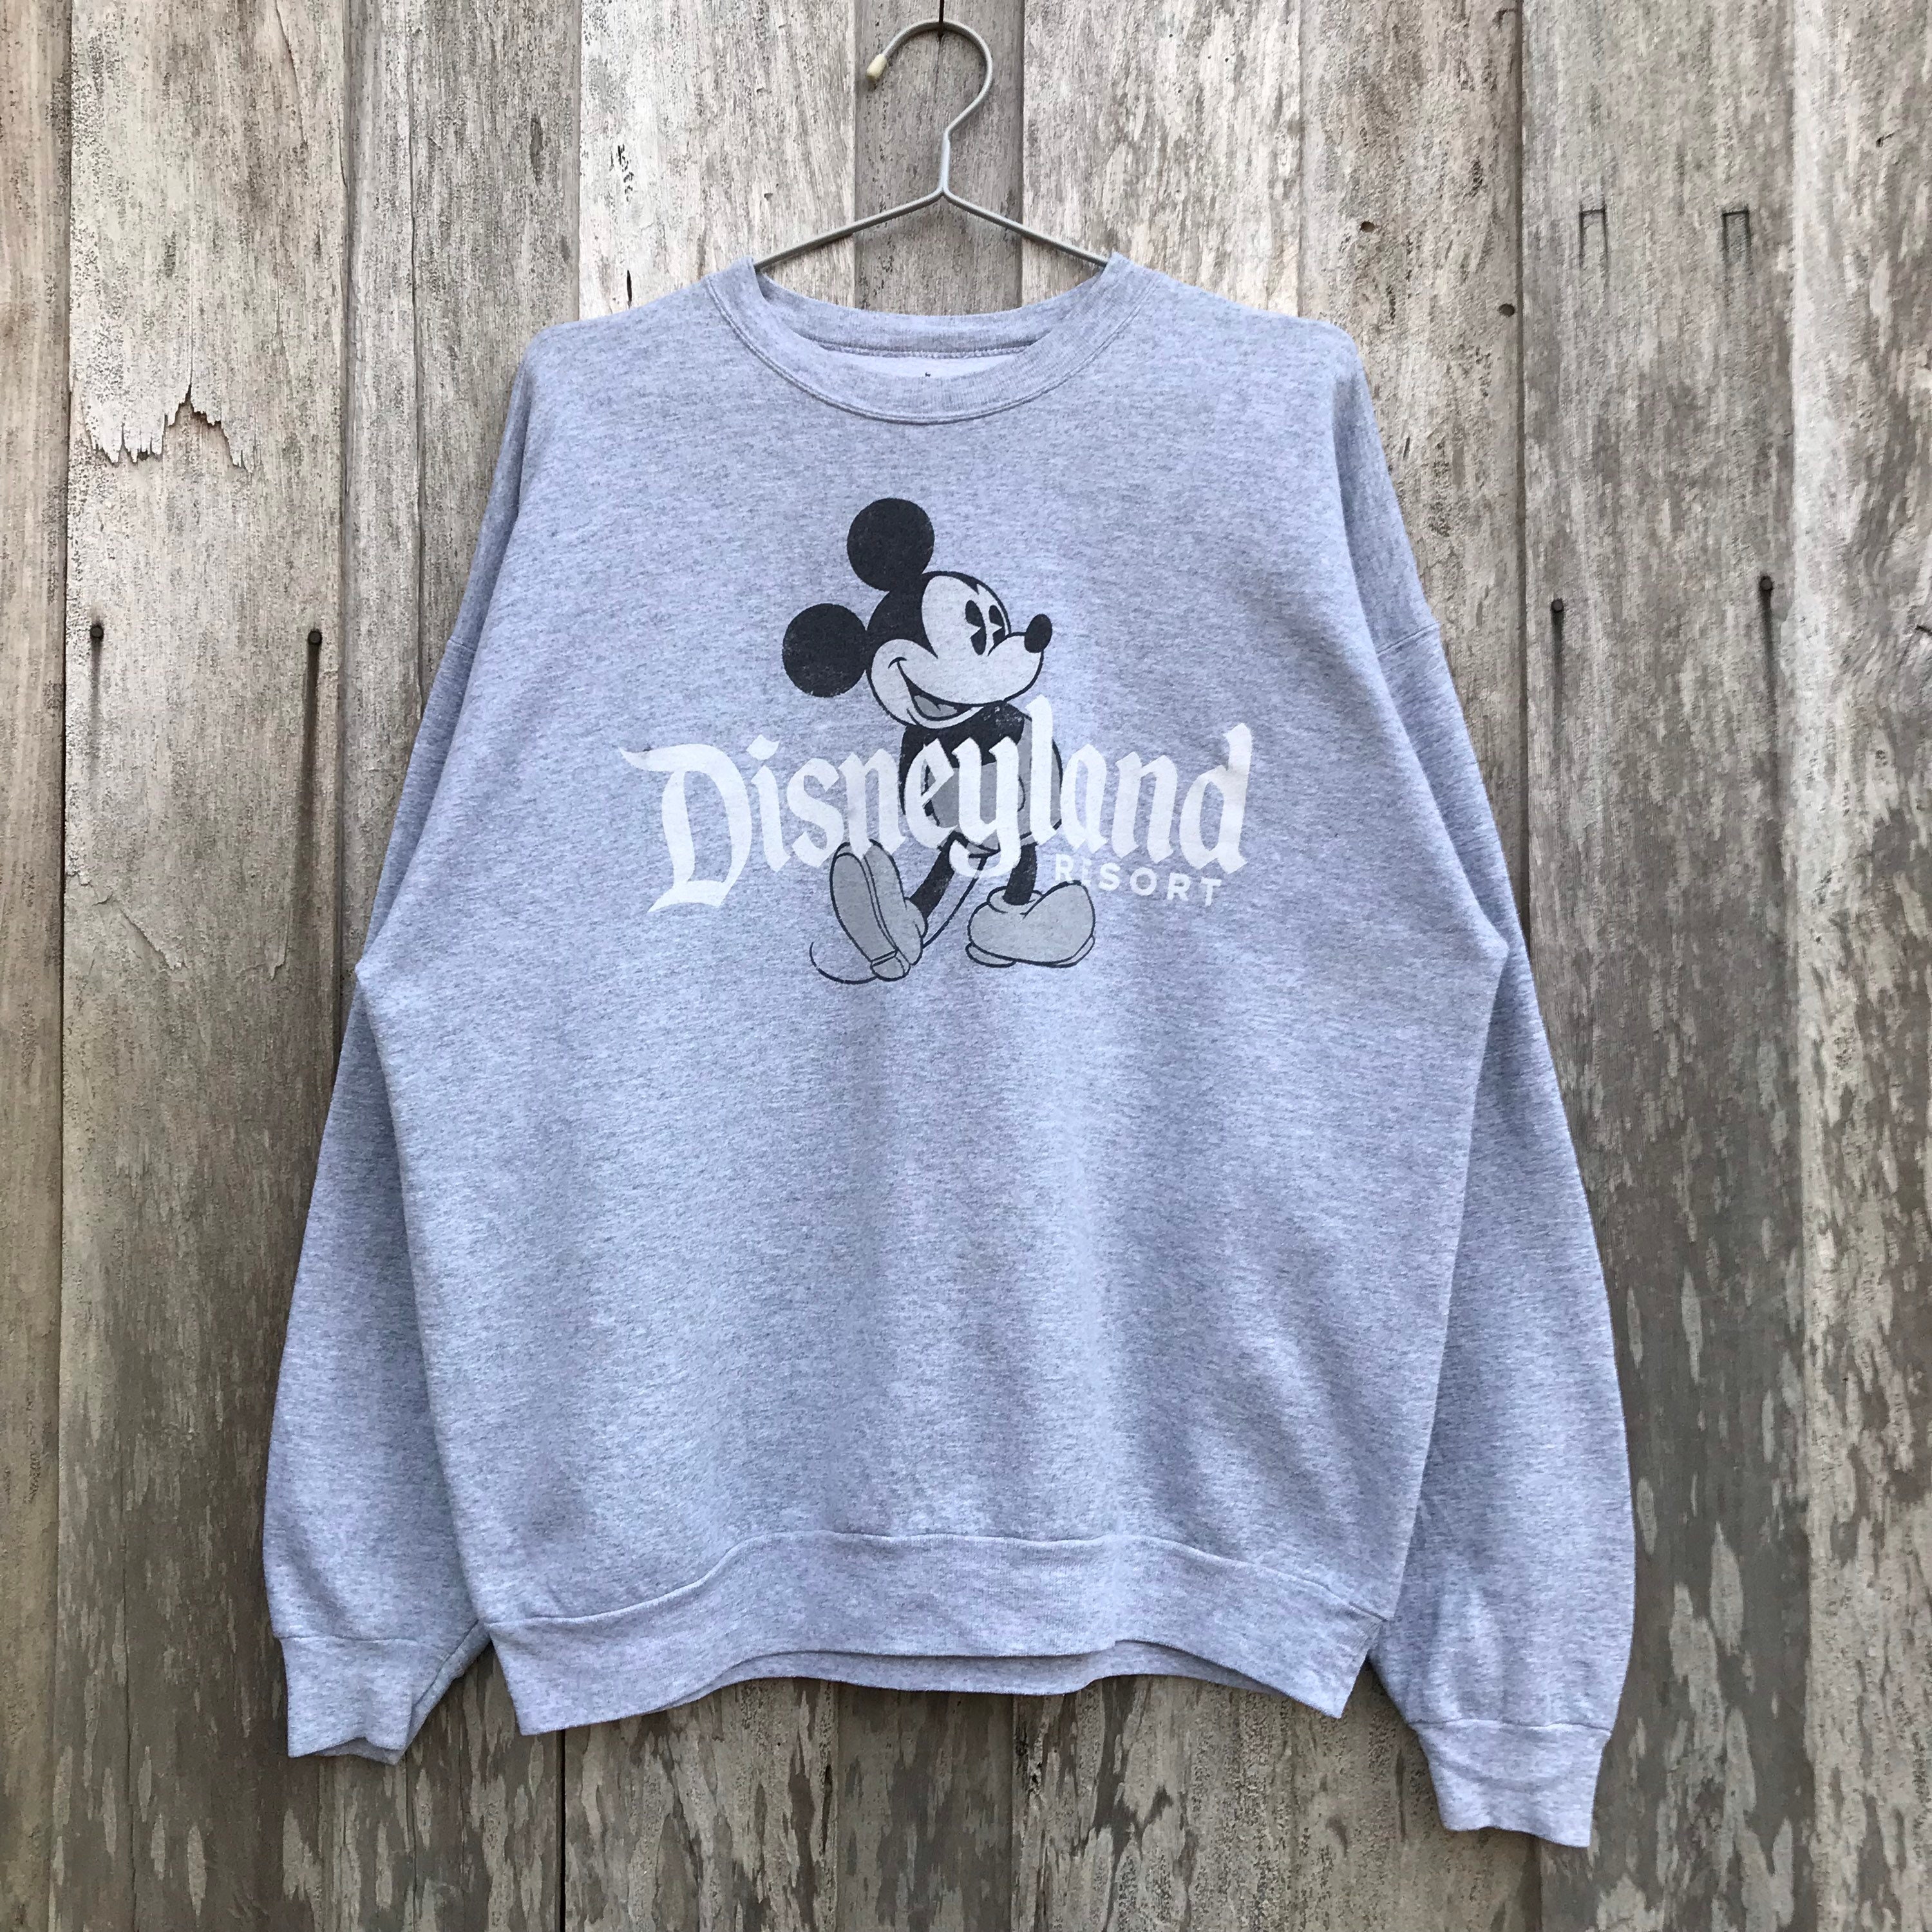 Disney Parks by Hanes knit